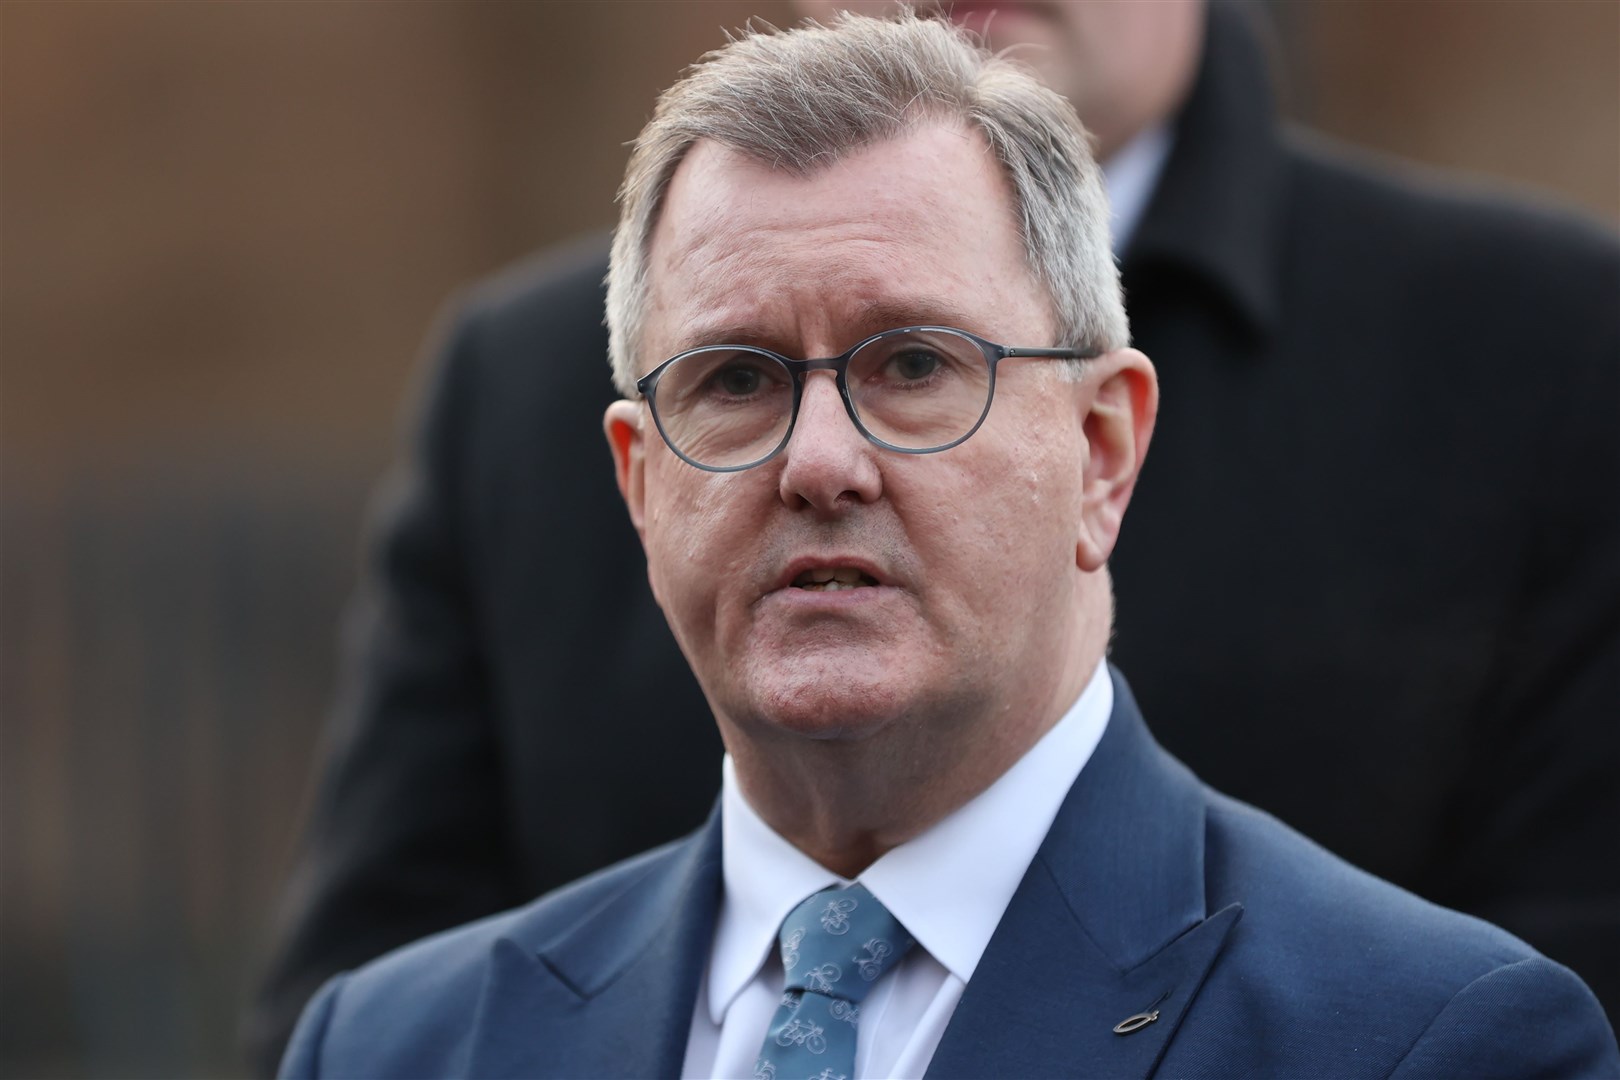 Sir Jeffrey Donaldson resigned as DUP leader after he was charged with historical sex offences (Liam McBurney/PA)